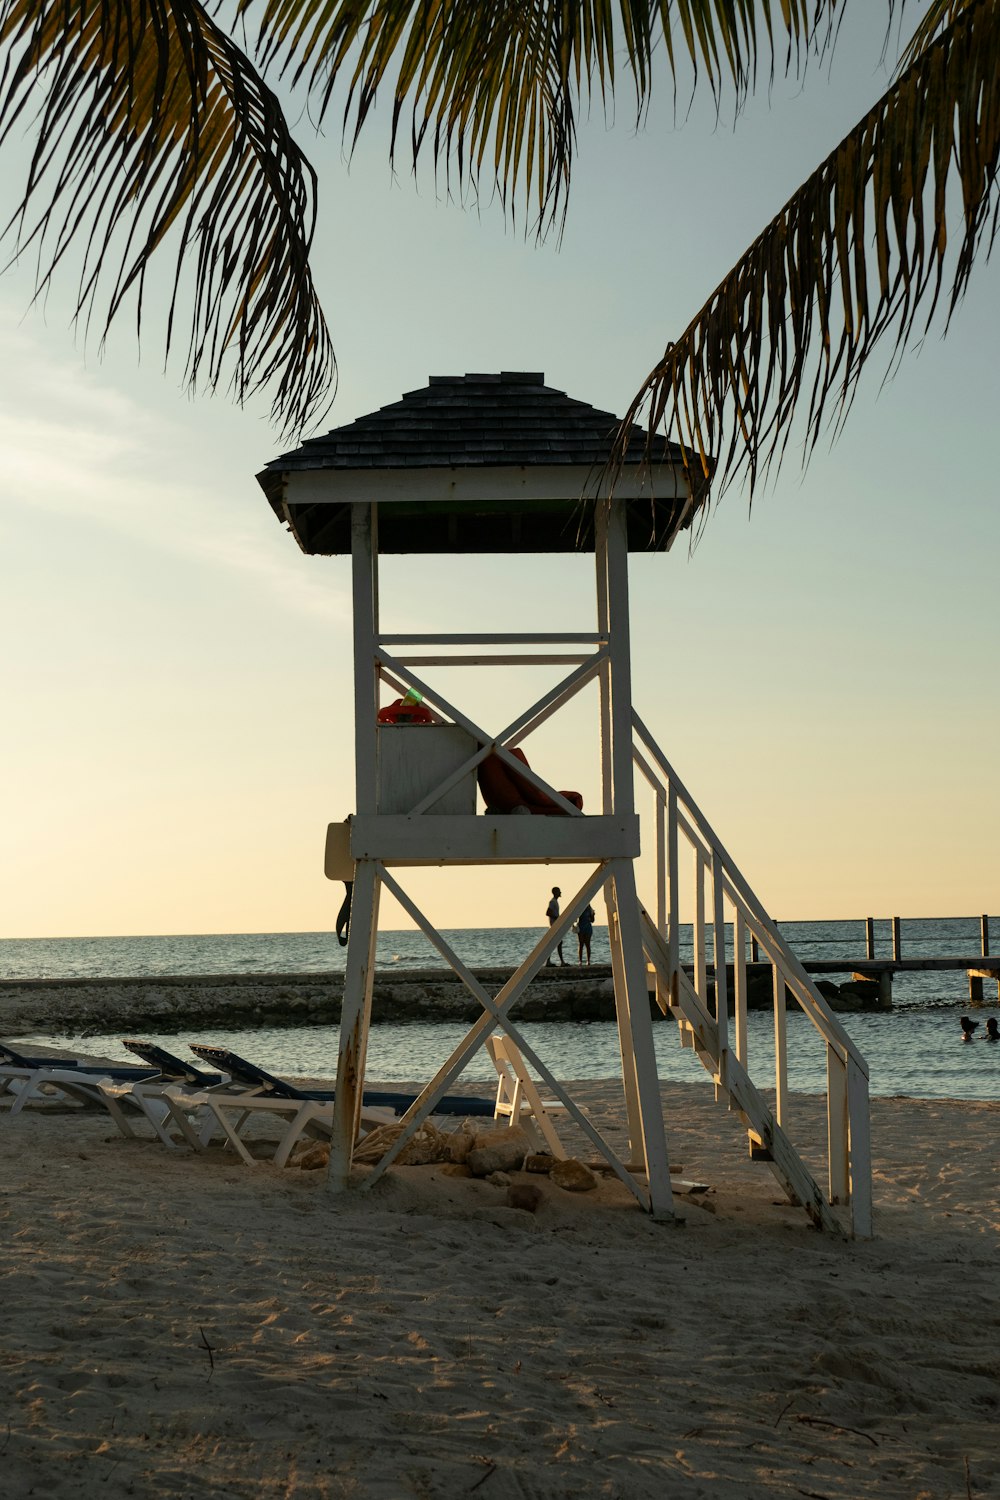 a lifeguard chair sitting on the beach under a palm tree